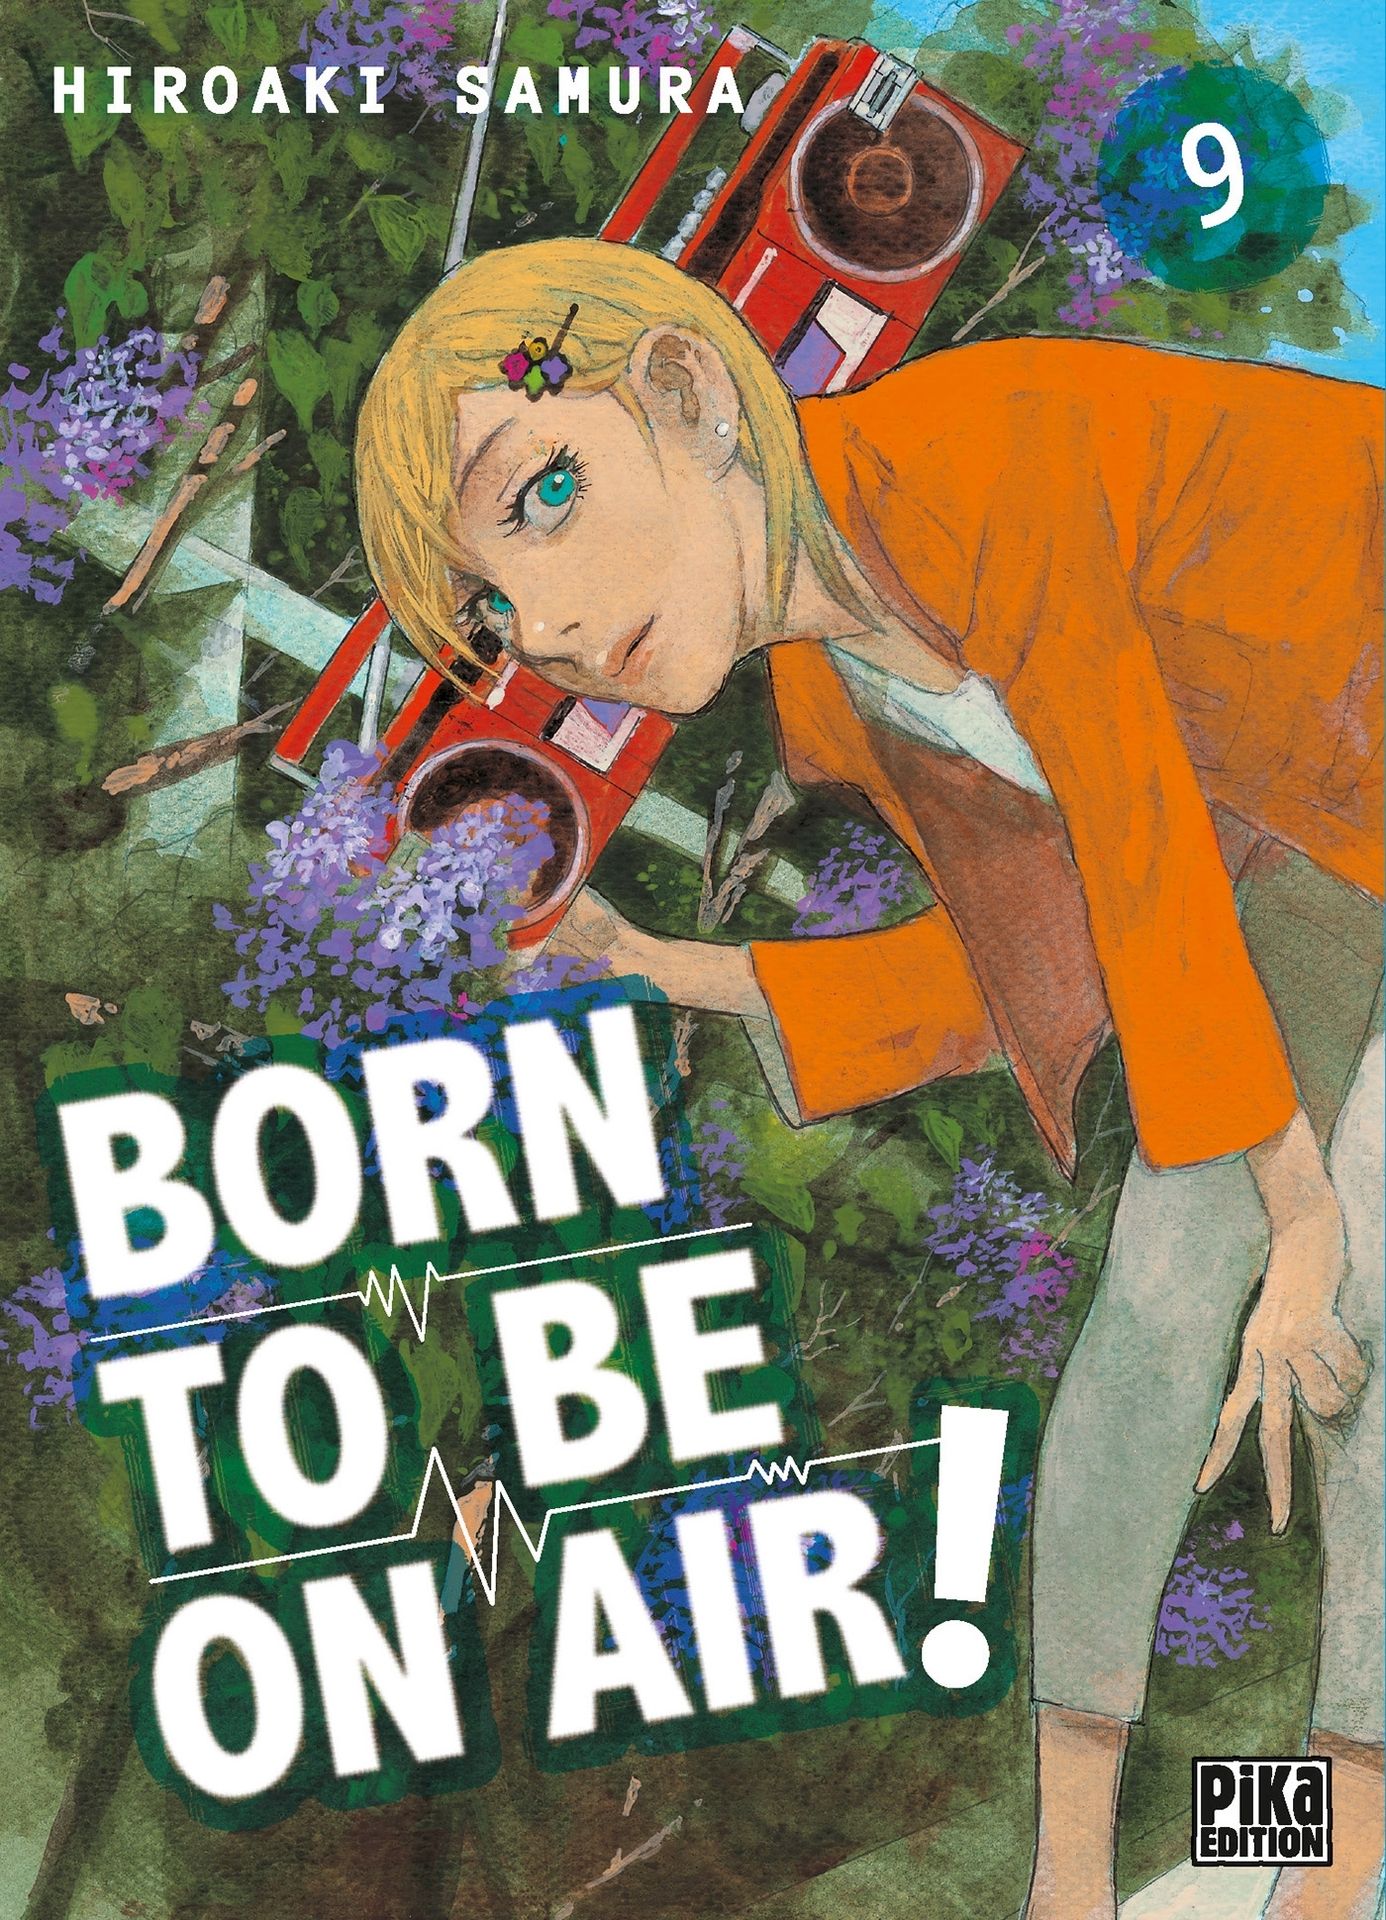 Born to be on air! Volume 9 page 1